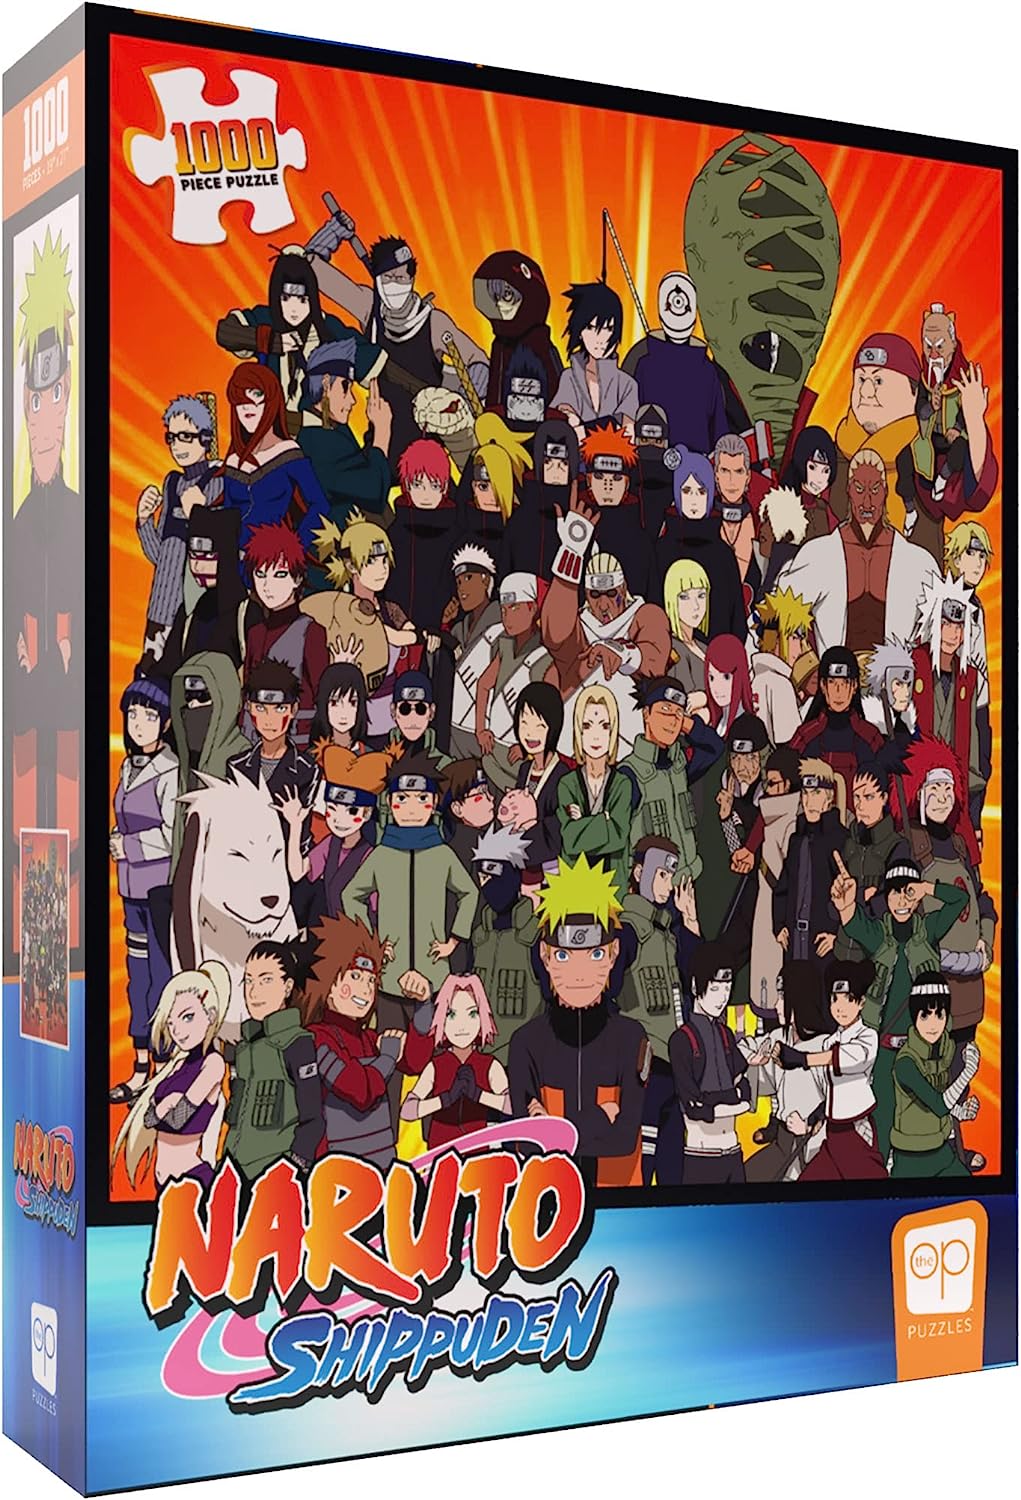 Naruto “Never Forget Your Friends” 1000 Piece Jigsaw Puzzle